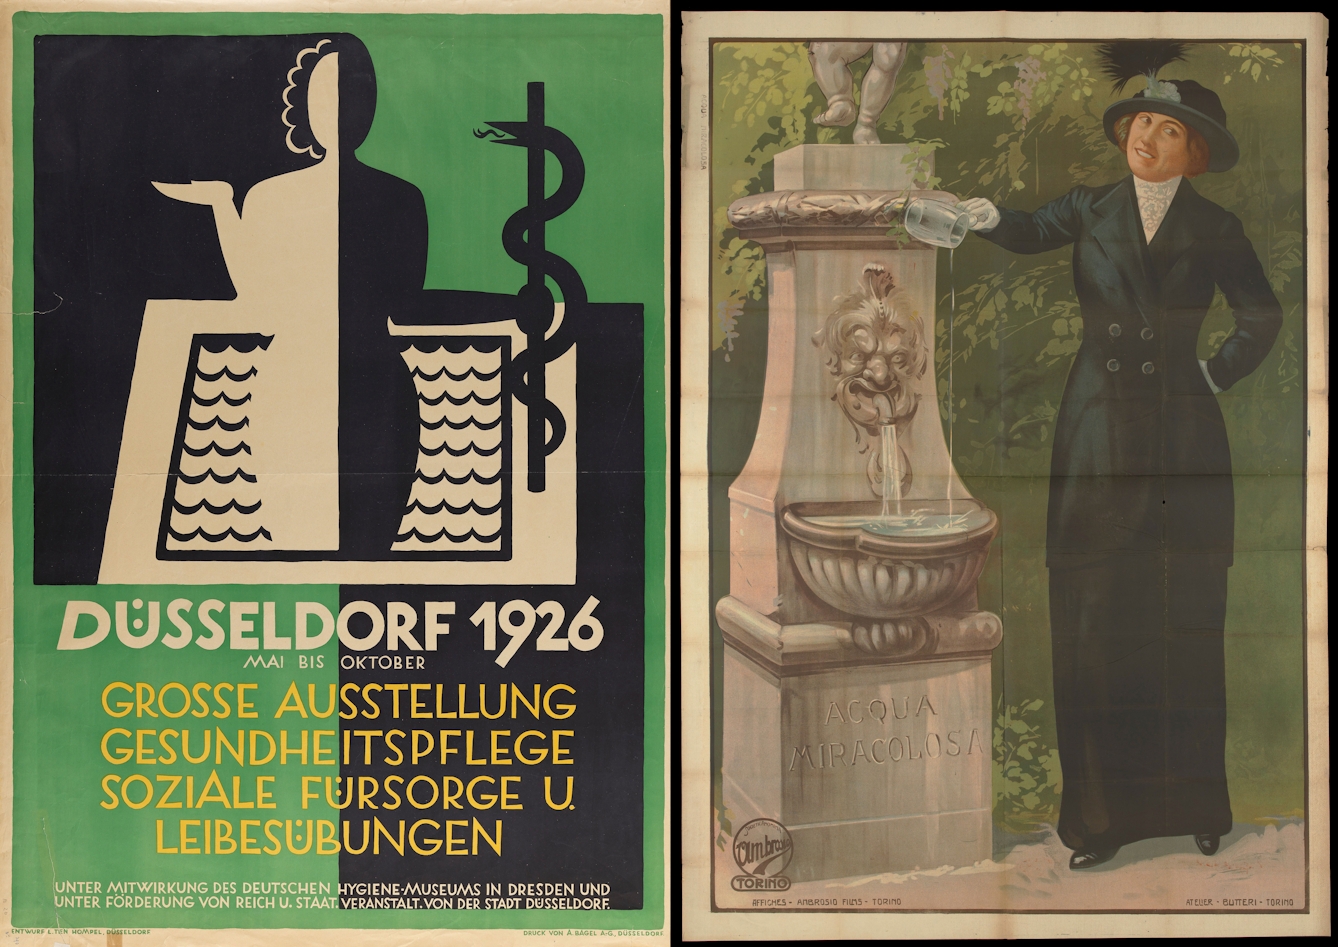 Two posters are shown. On the left, a cut-out style poster shows a woman holding up the palm of her hand on the left and holding the staff of Aesculapius on the right. There is water in the background.
On the right a painting-style poster shows a grinning woman in Edwardian clothes pouring water into a fountain.